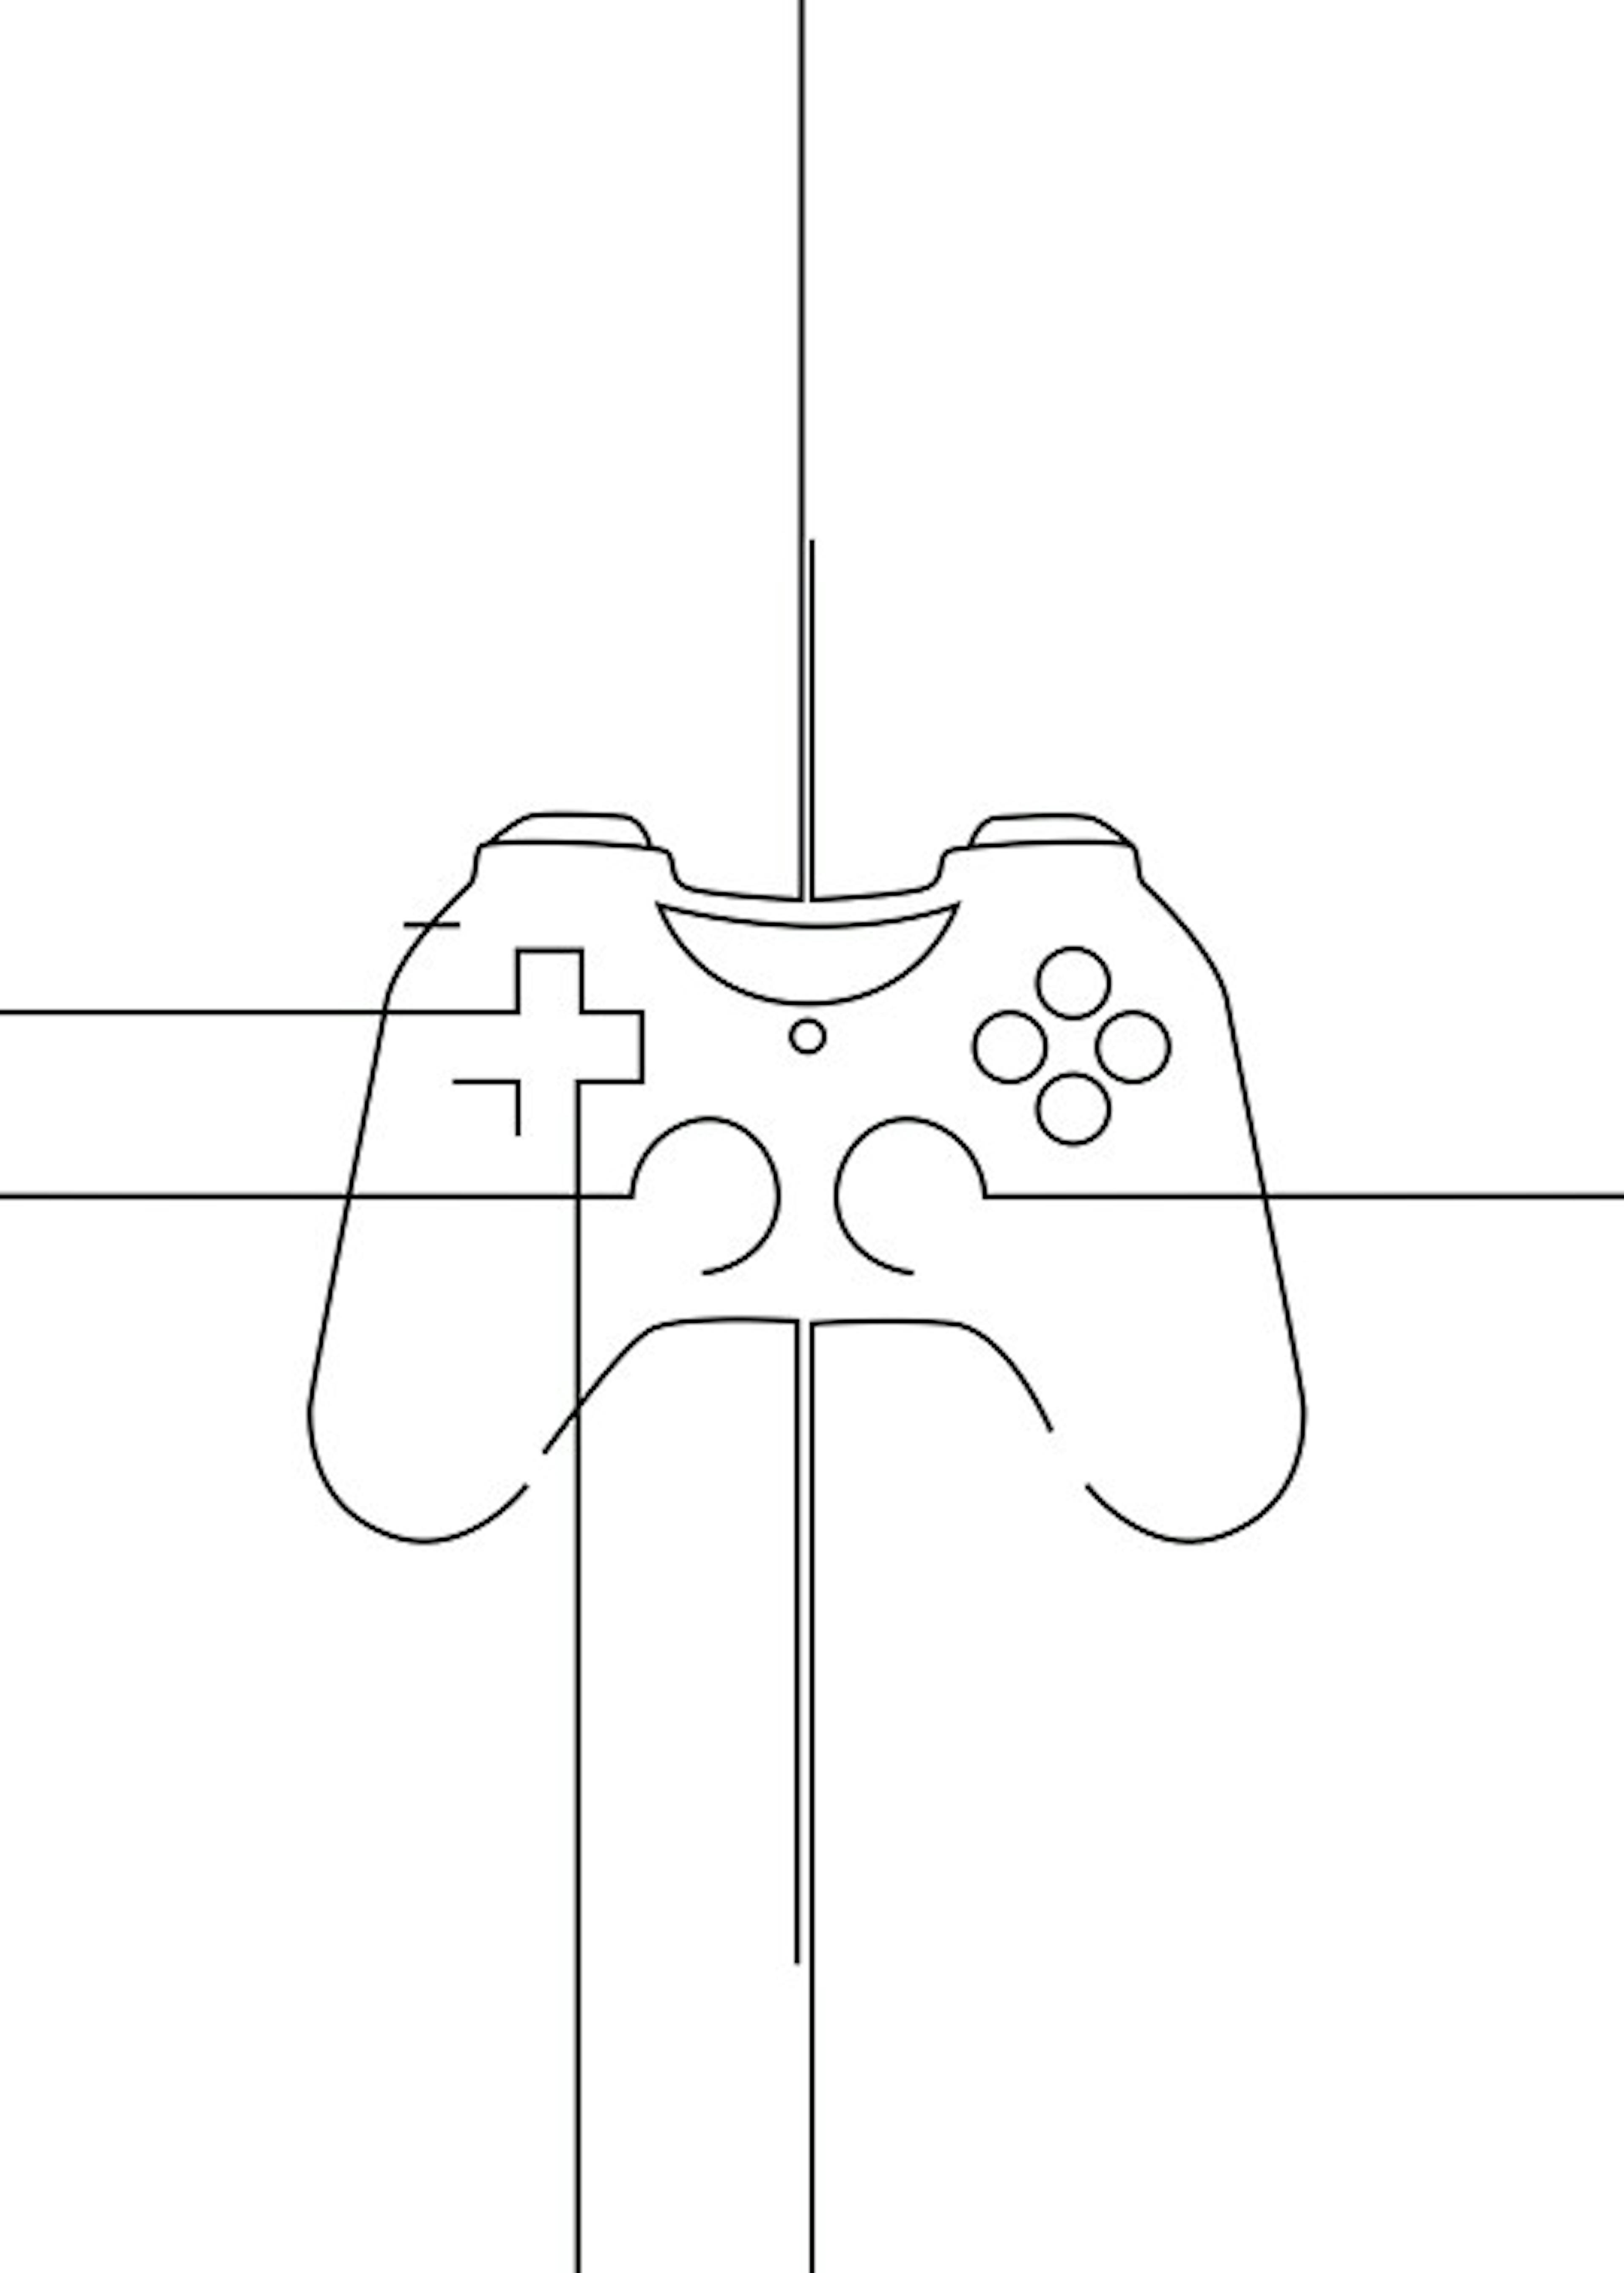 Game Controller Poster